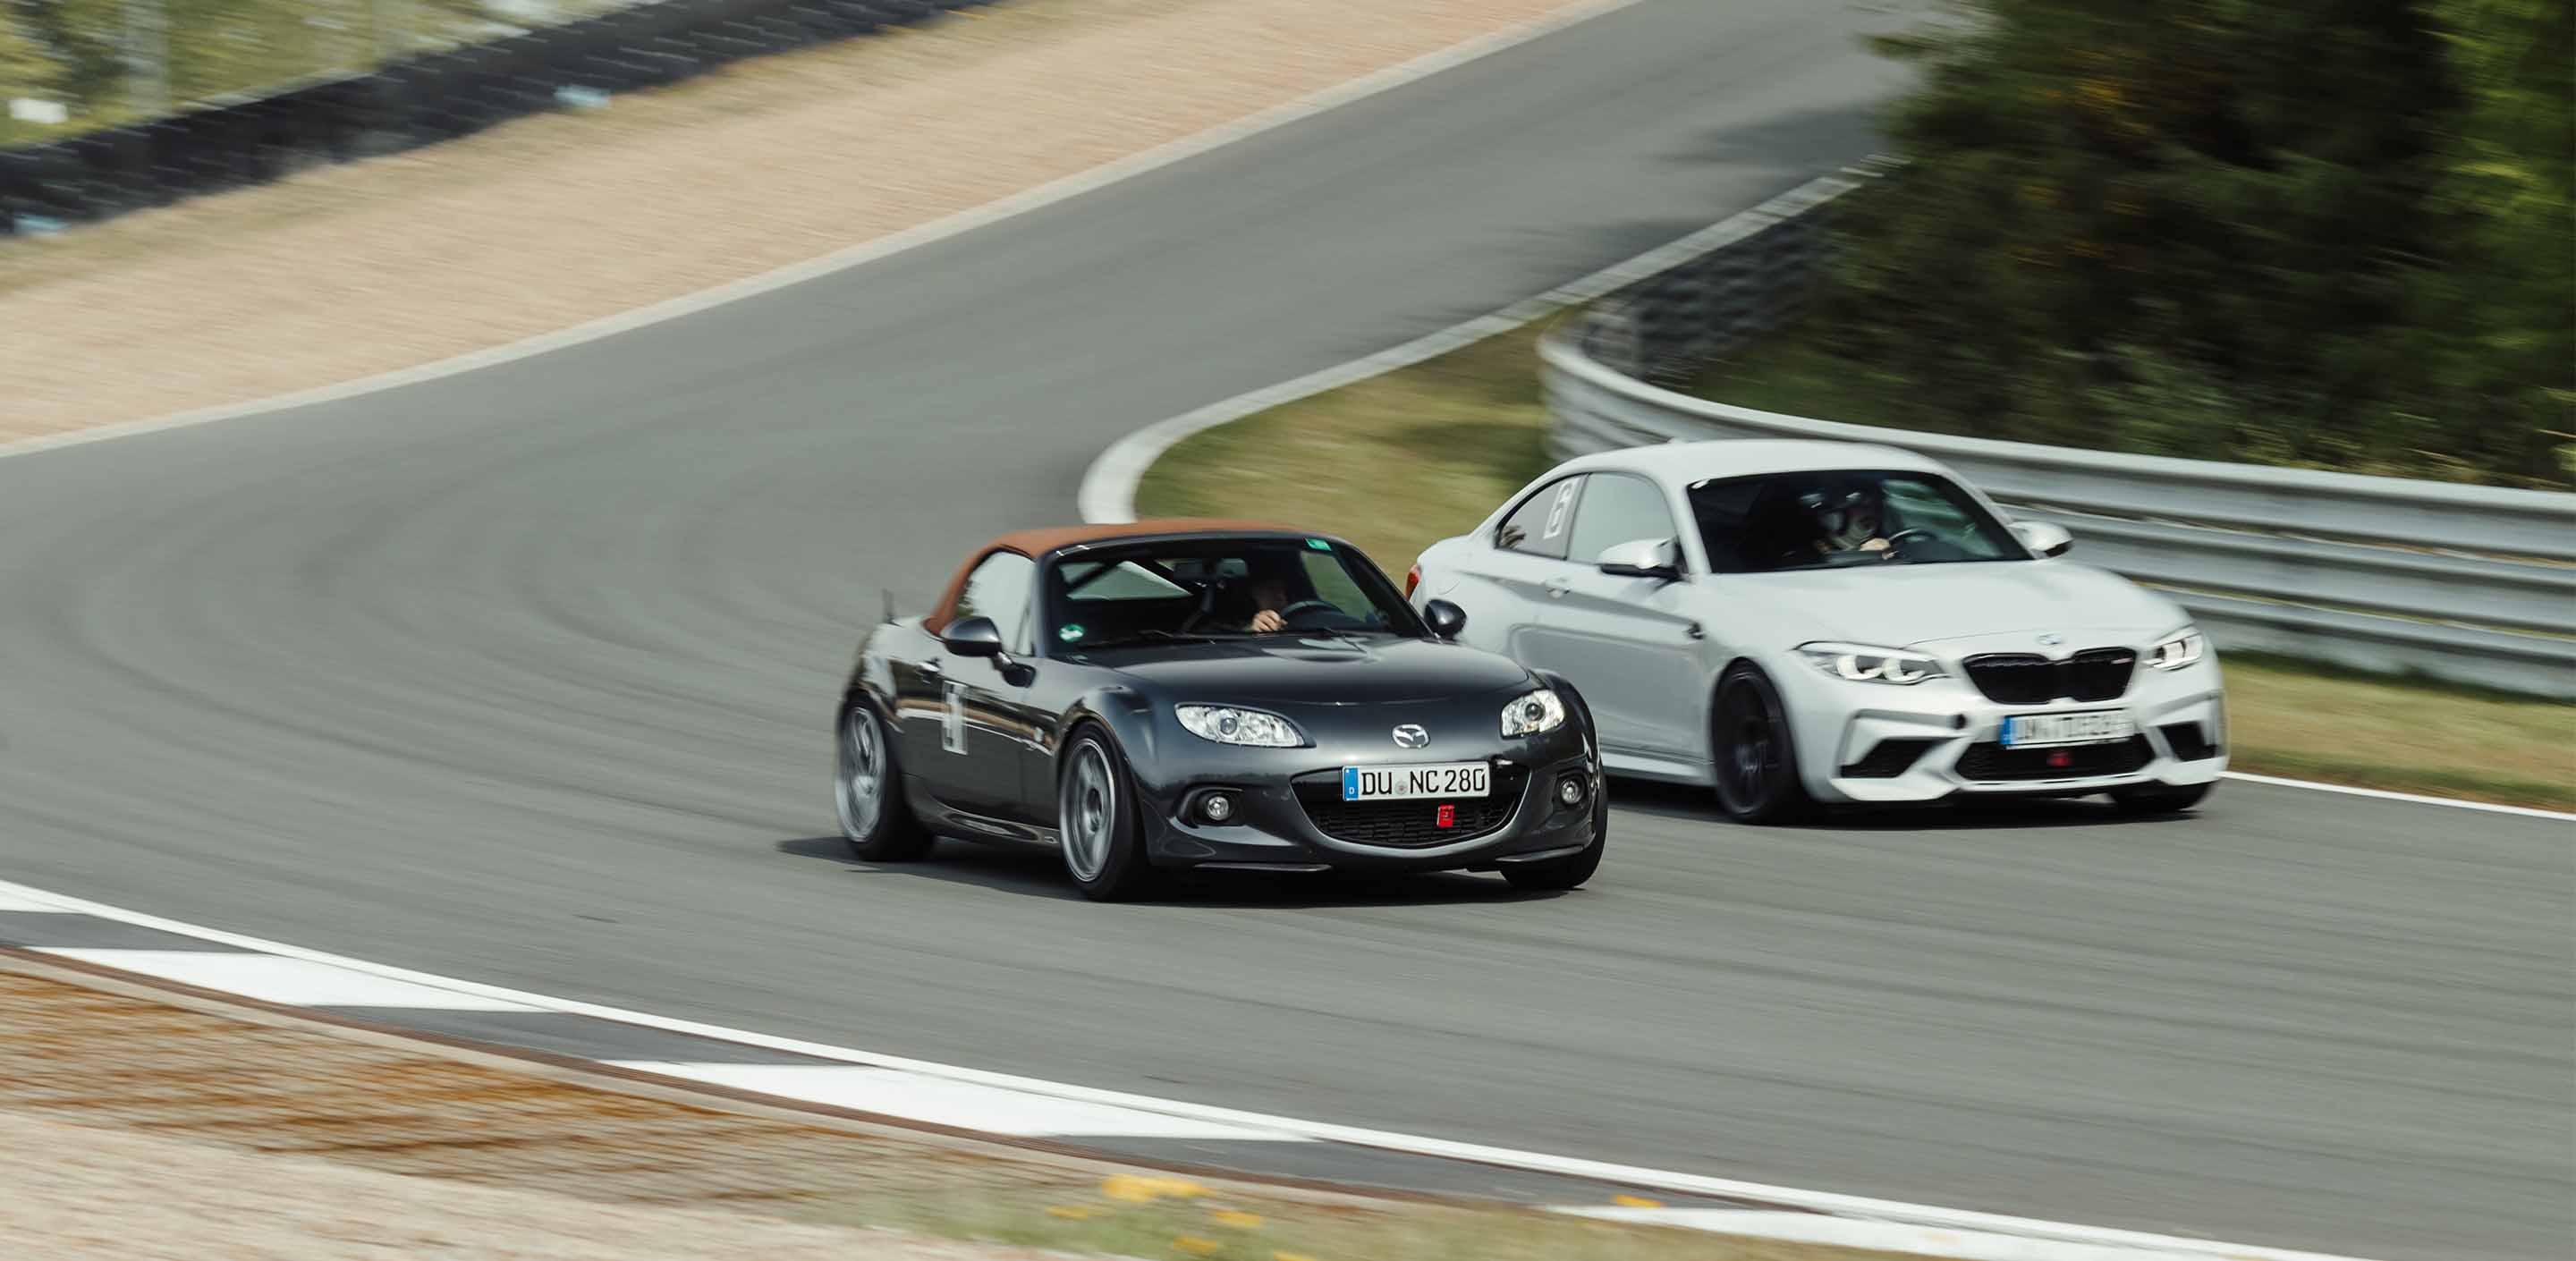 A BMW M2 is overtaking a Mazda MX5 during a GP Days Open Pitlane Track Day at Bilster Berg